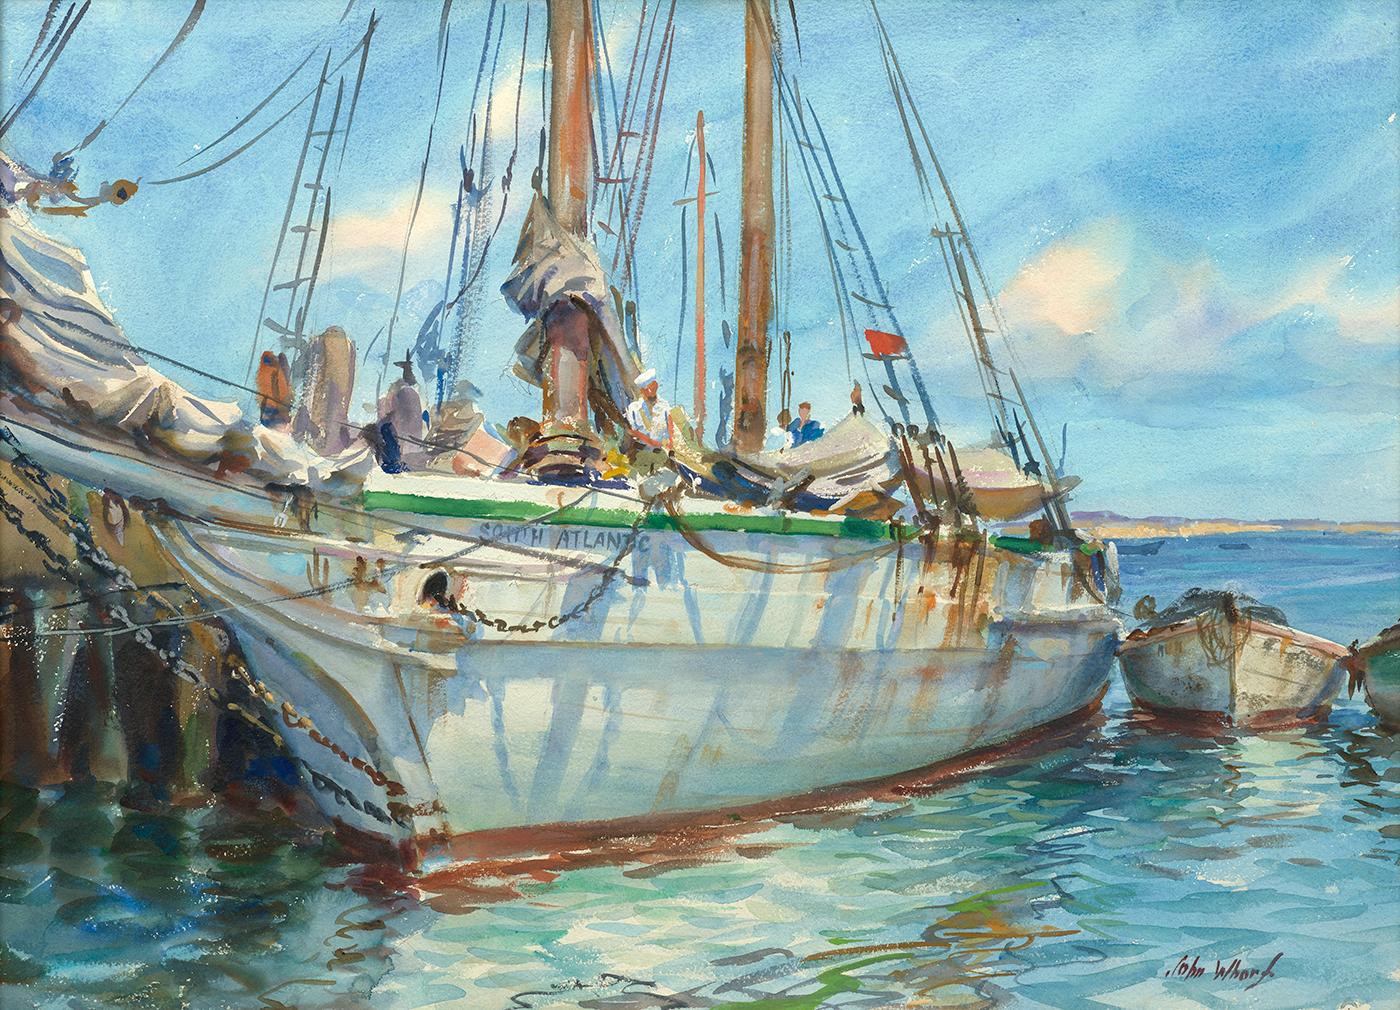 The “South Atlantic” in Port (on verso: Seascape Study)